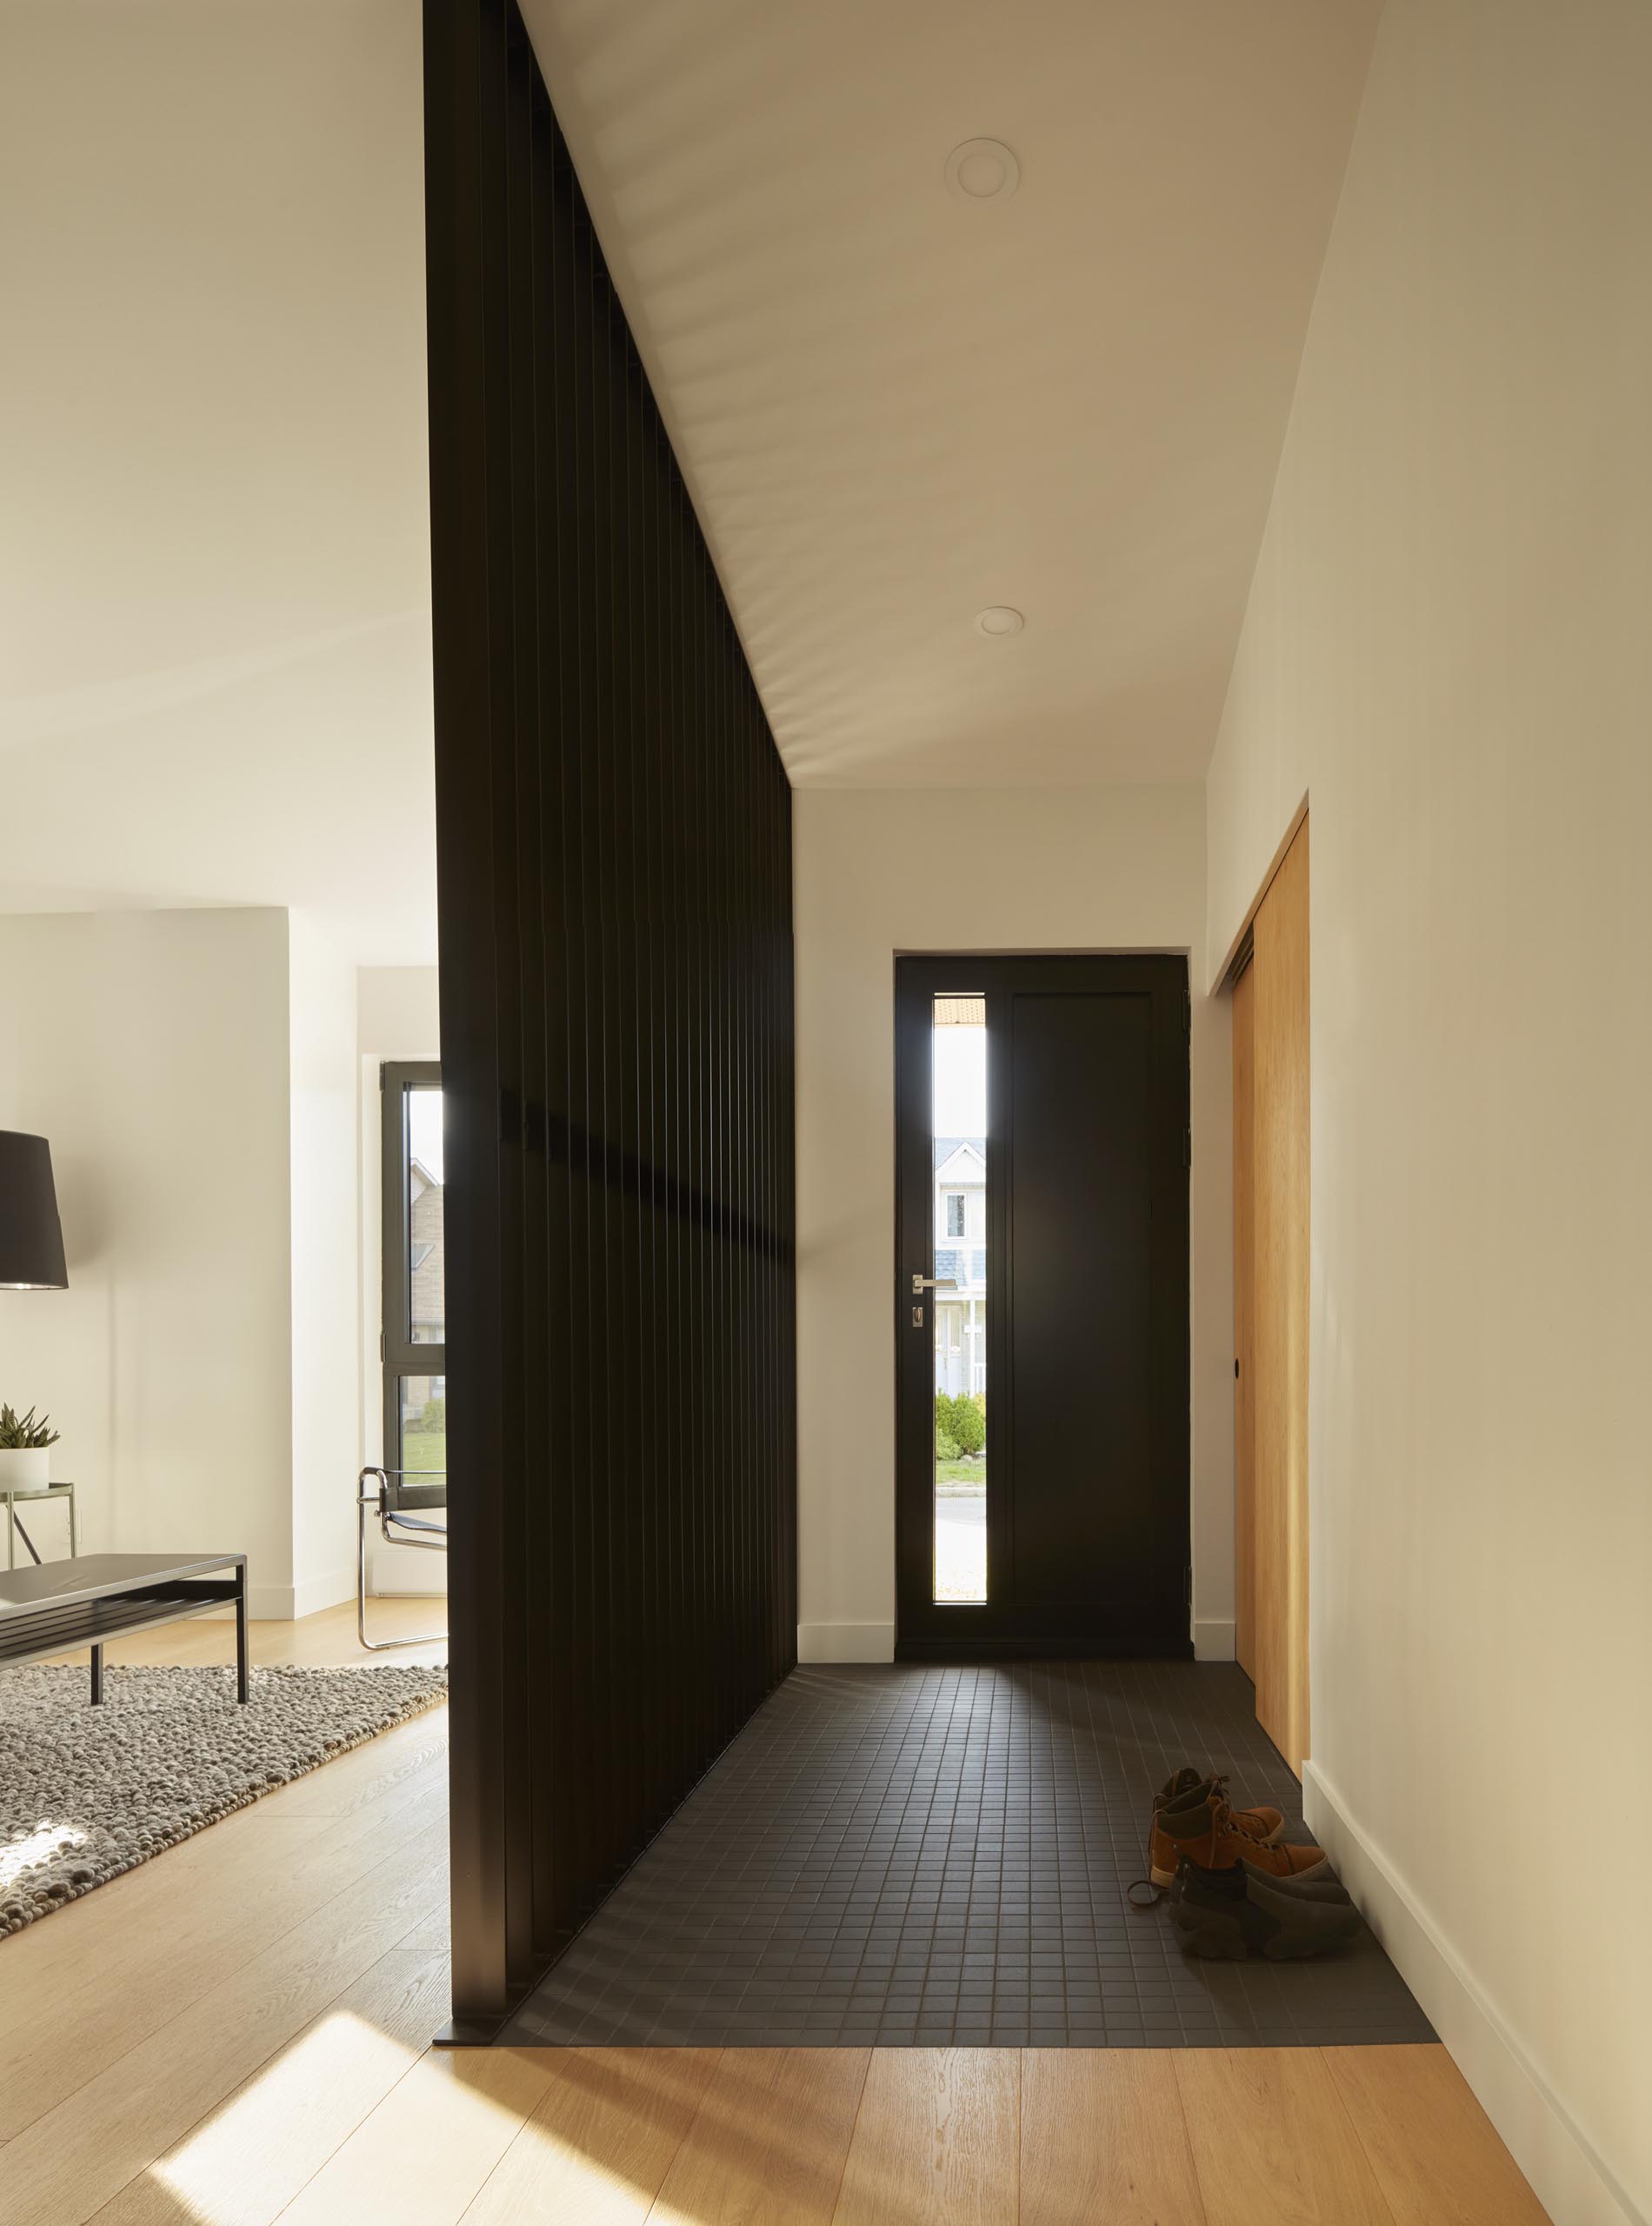 This modern room divider, which also complements the dark tiled floor, allows the light from the living room to travel through to the entryway.